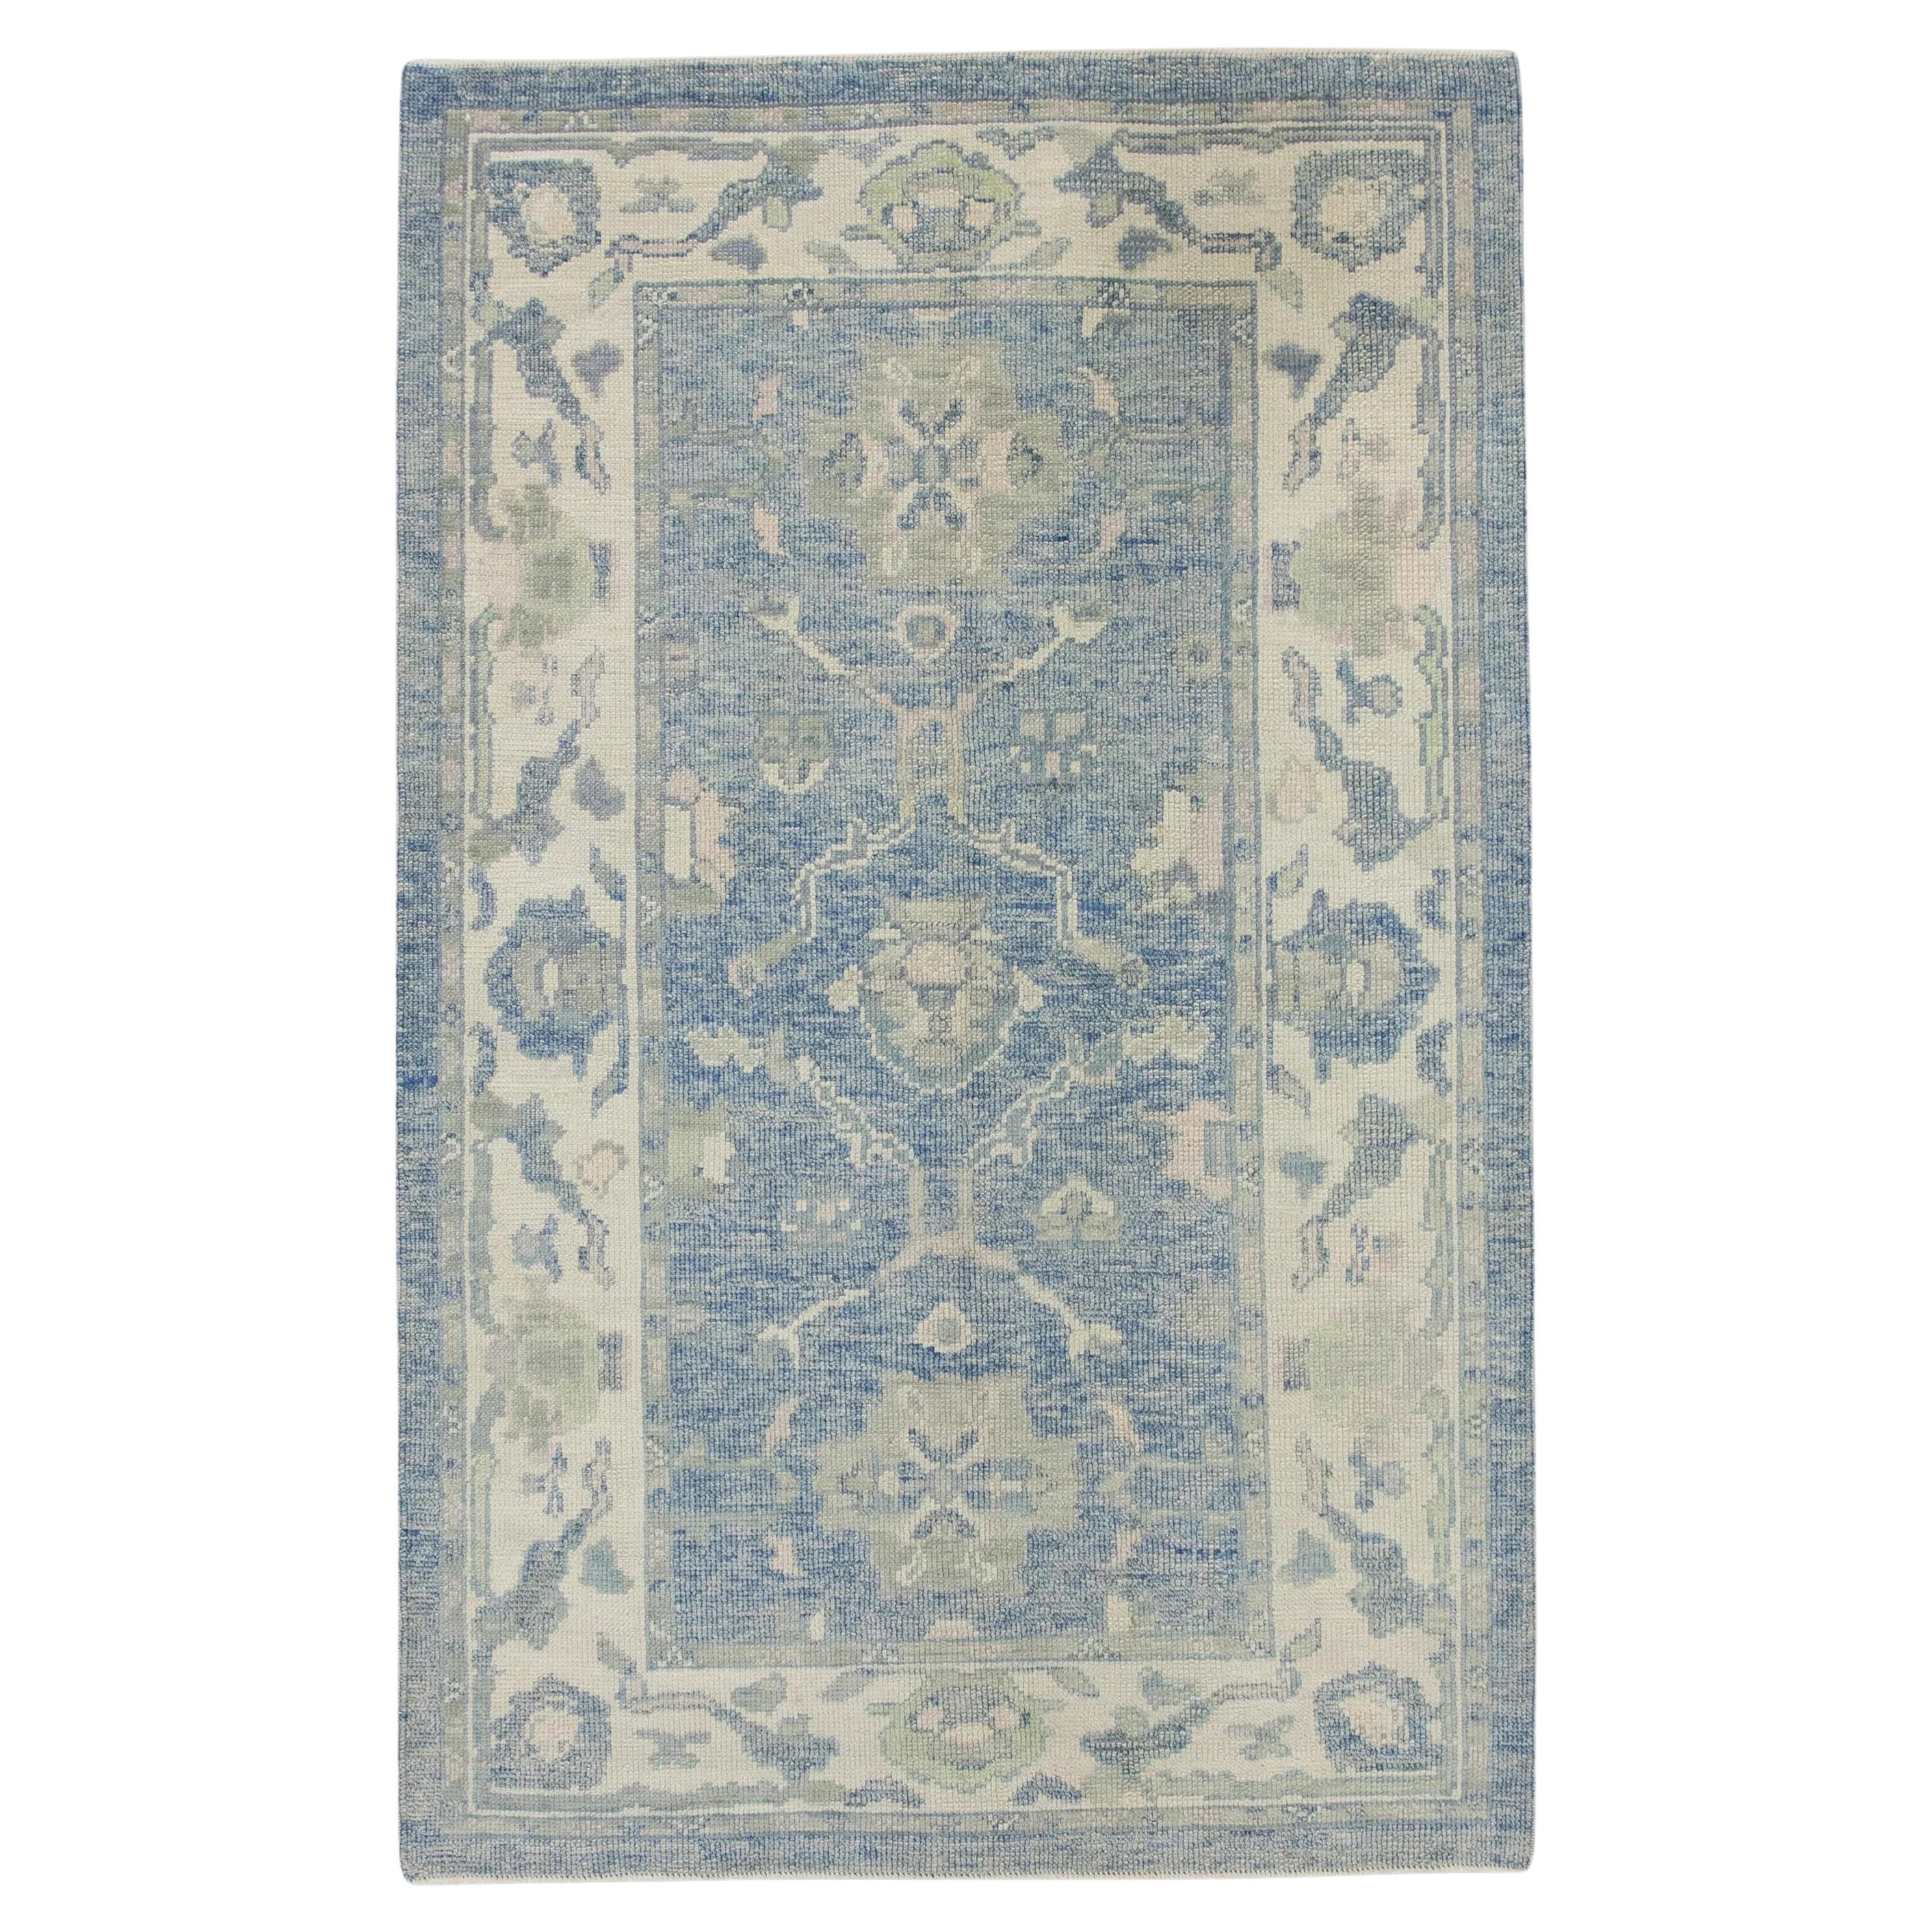 Blue Handwoven Wool Turkish Oushak Rug with Green Floral Pattern 4'1" x 6'5" For Sale